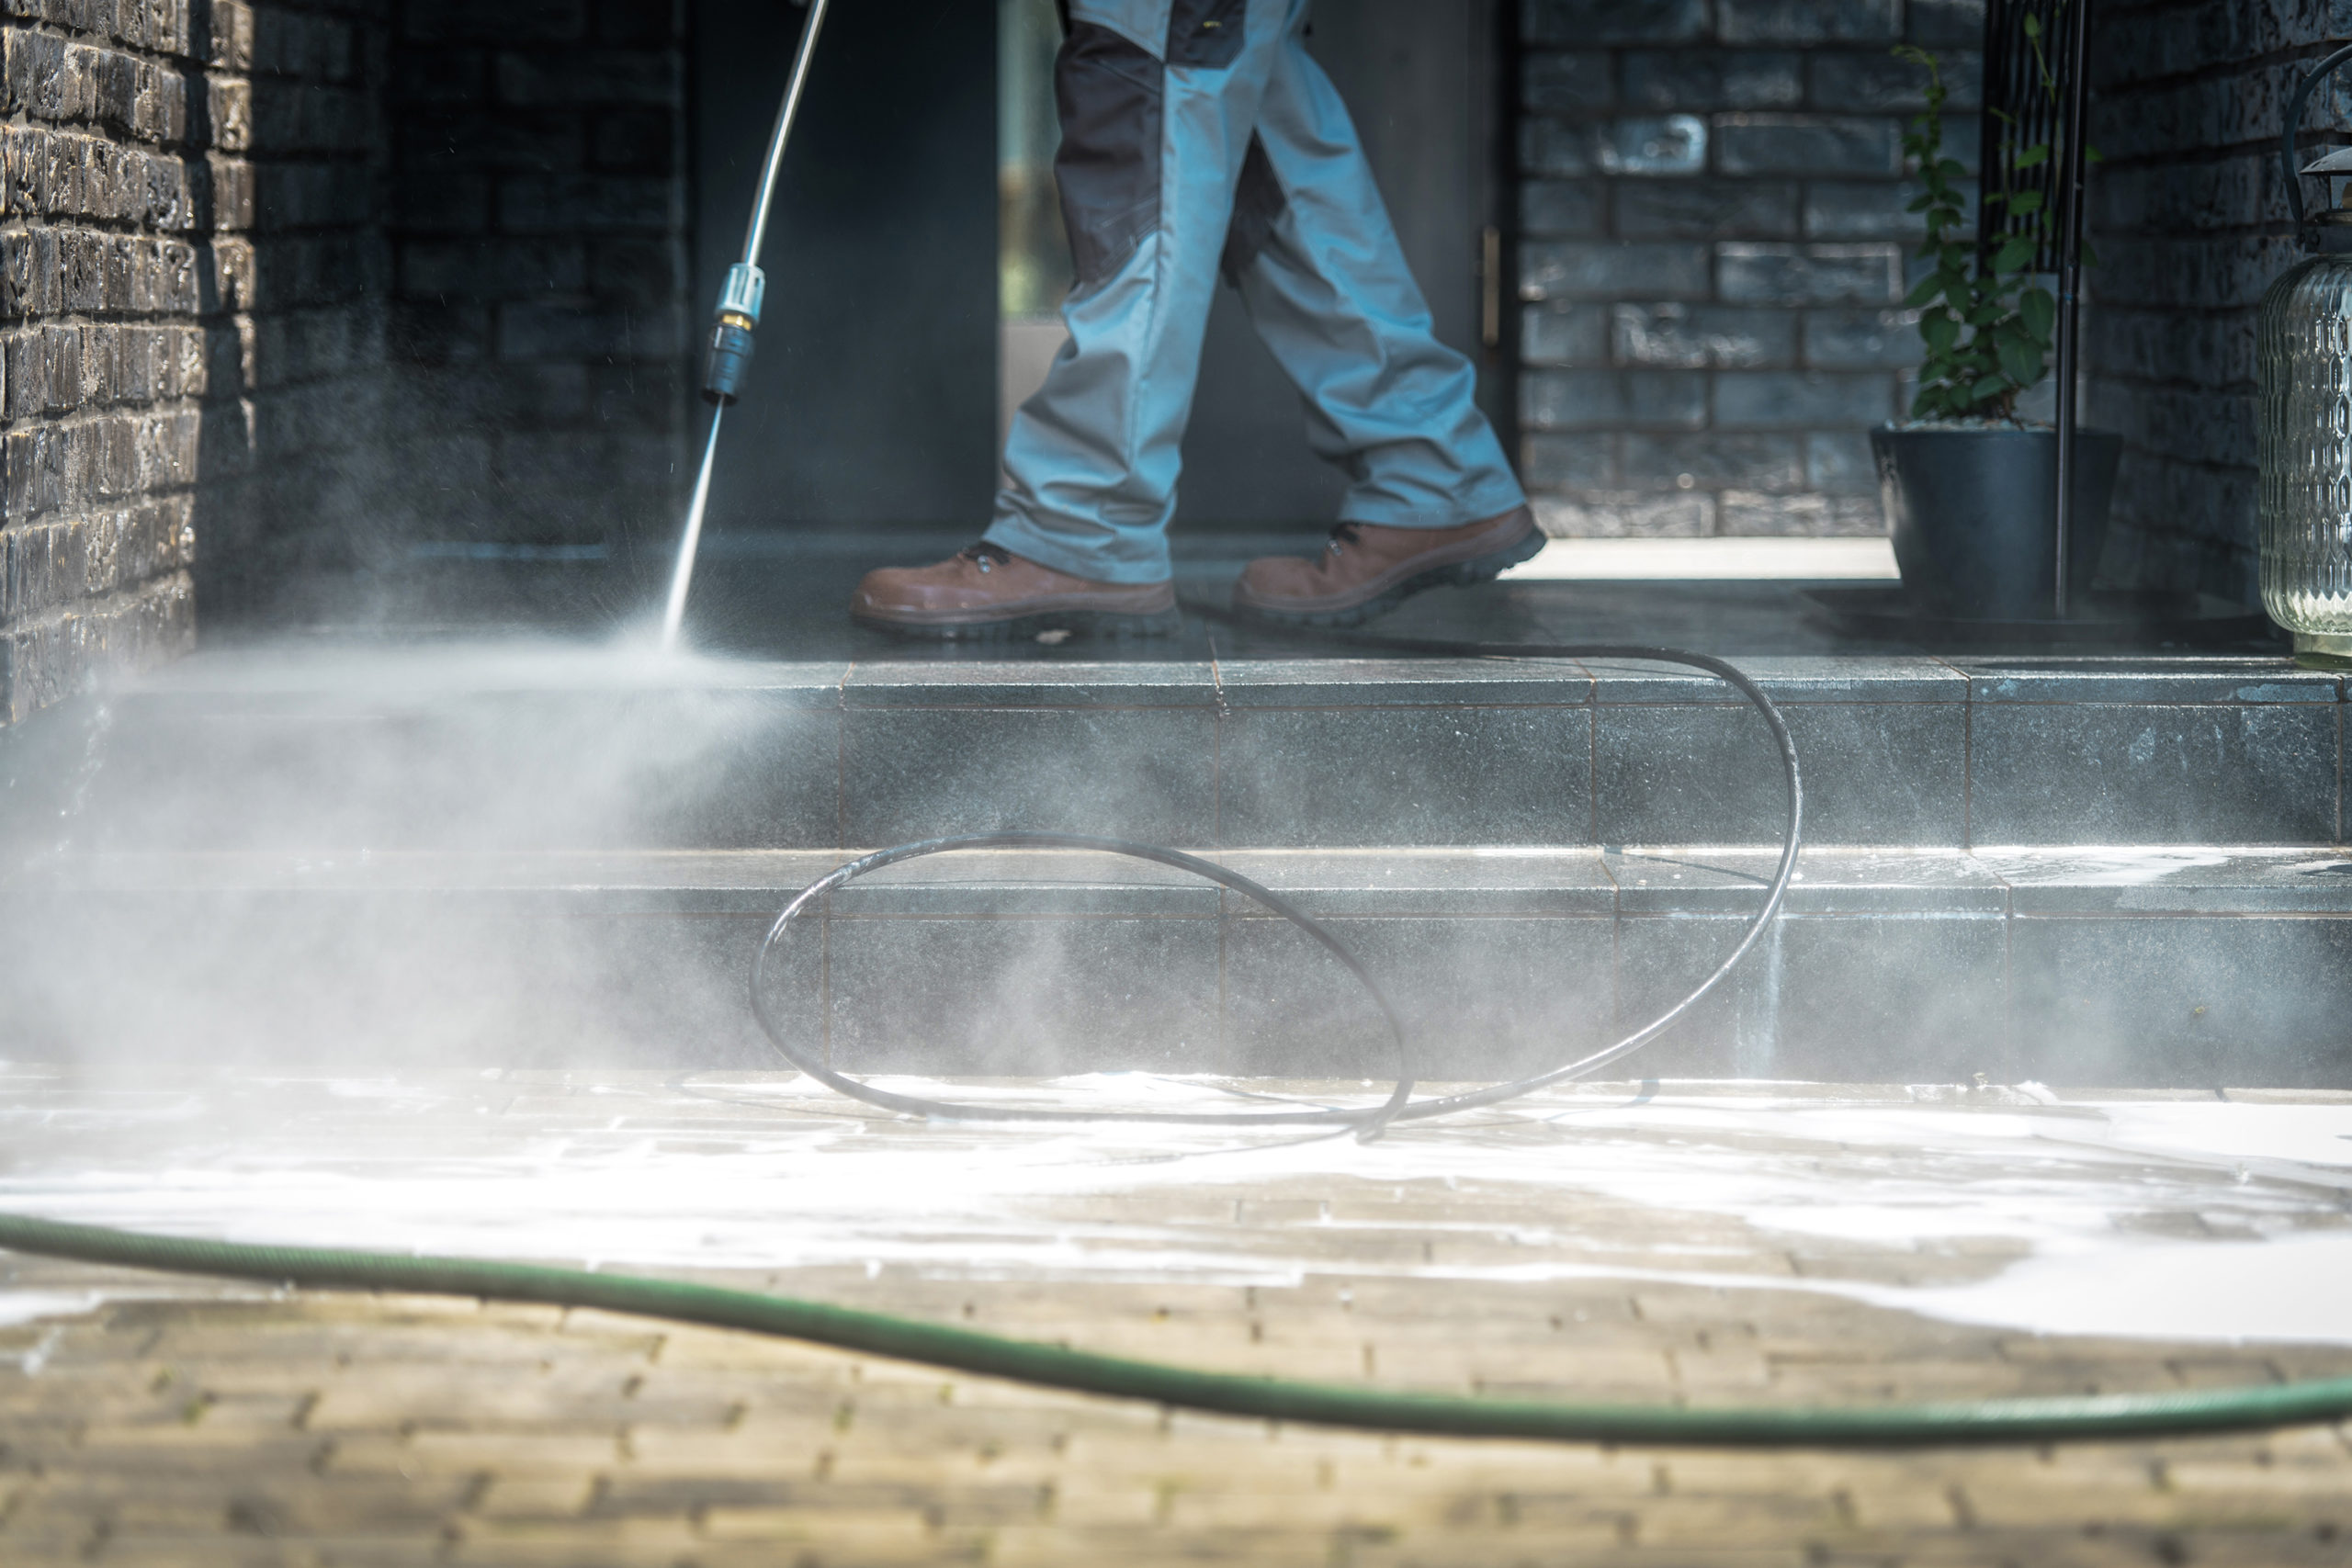 A man uses a pressure washer to clean concrete steps in front of a home.